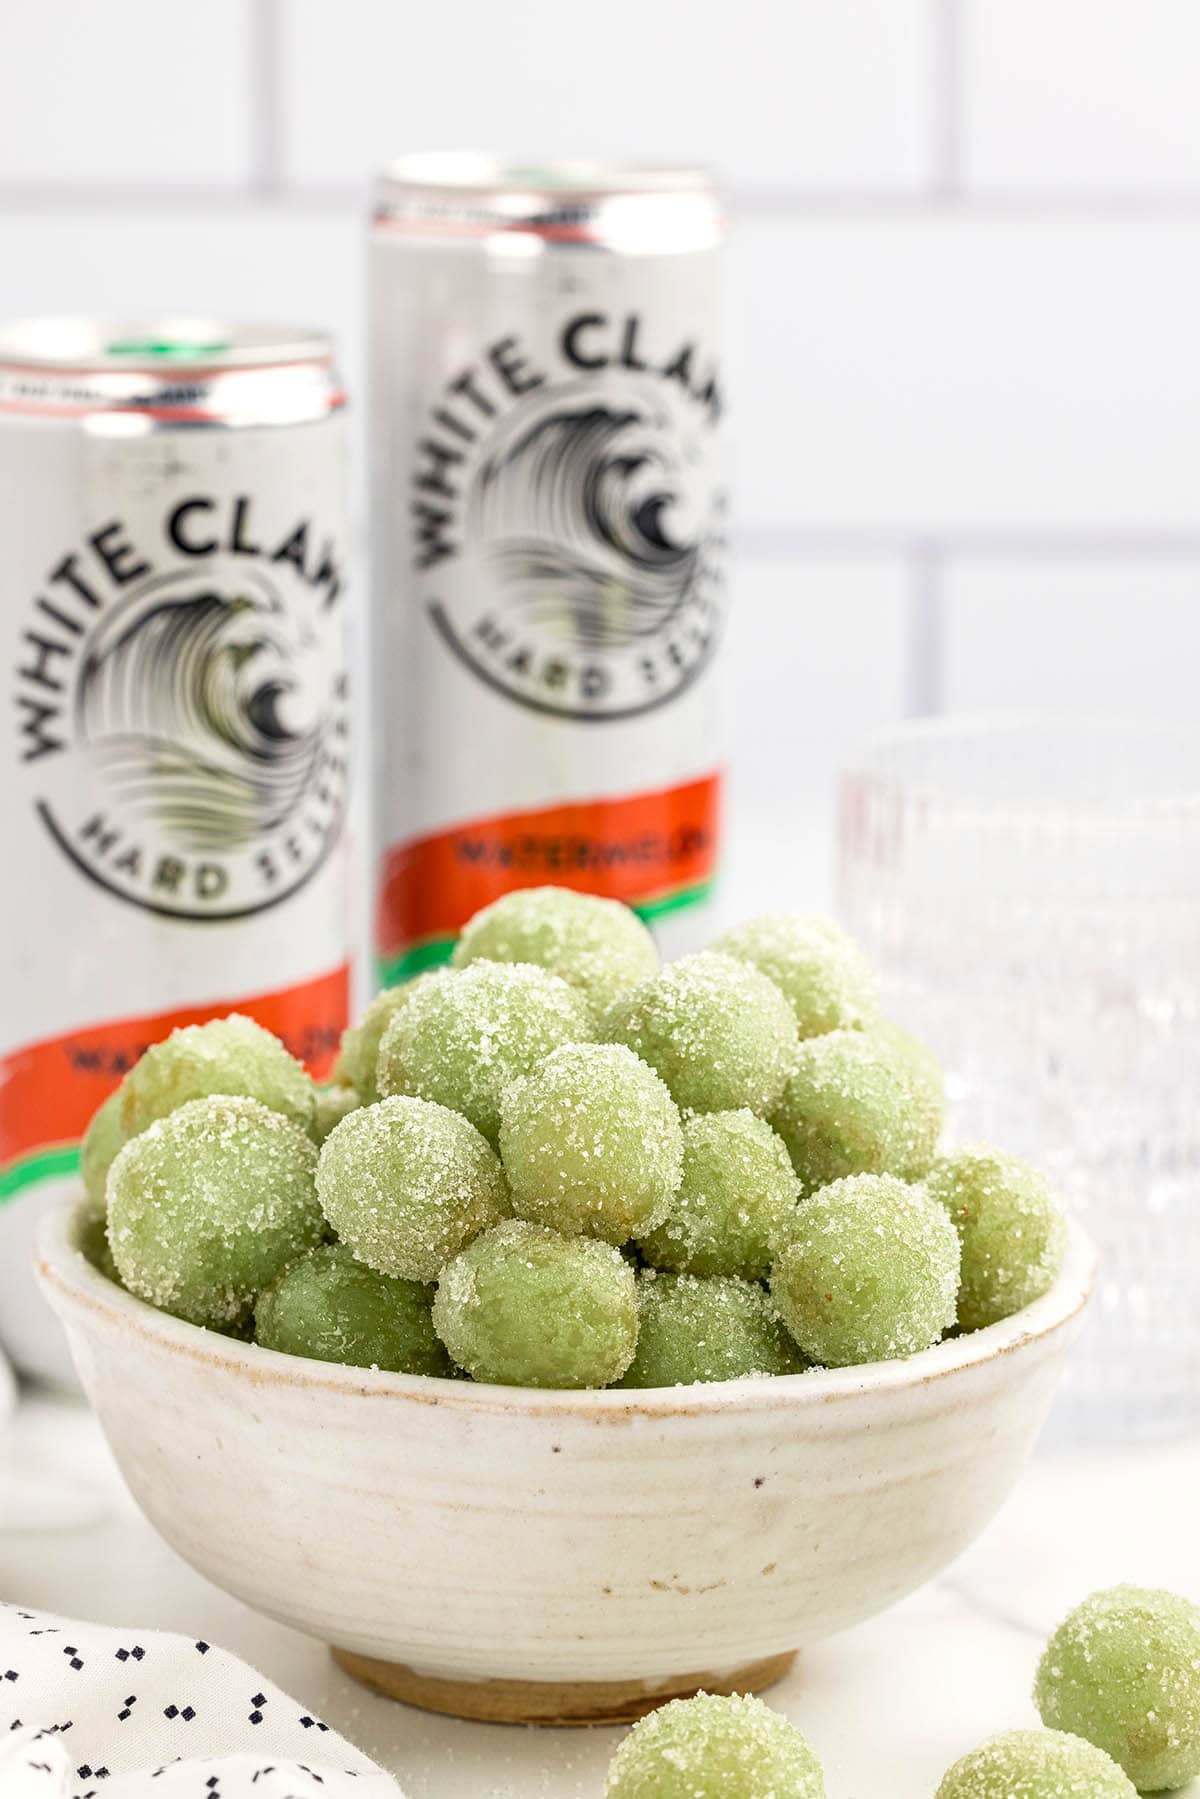 a bowl of Boozy Grapes and two cans of white claws.